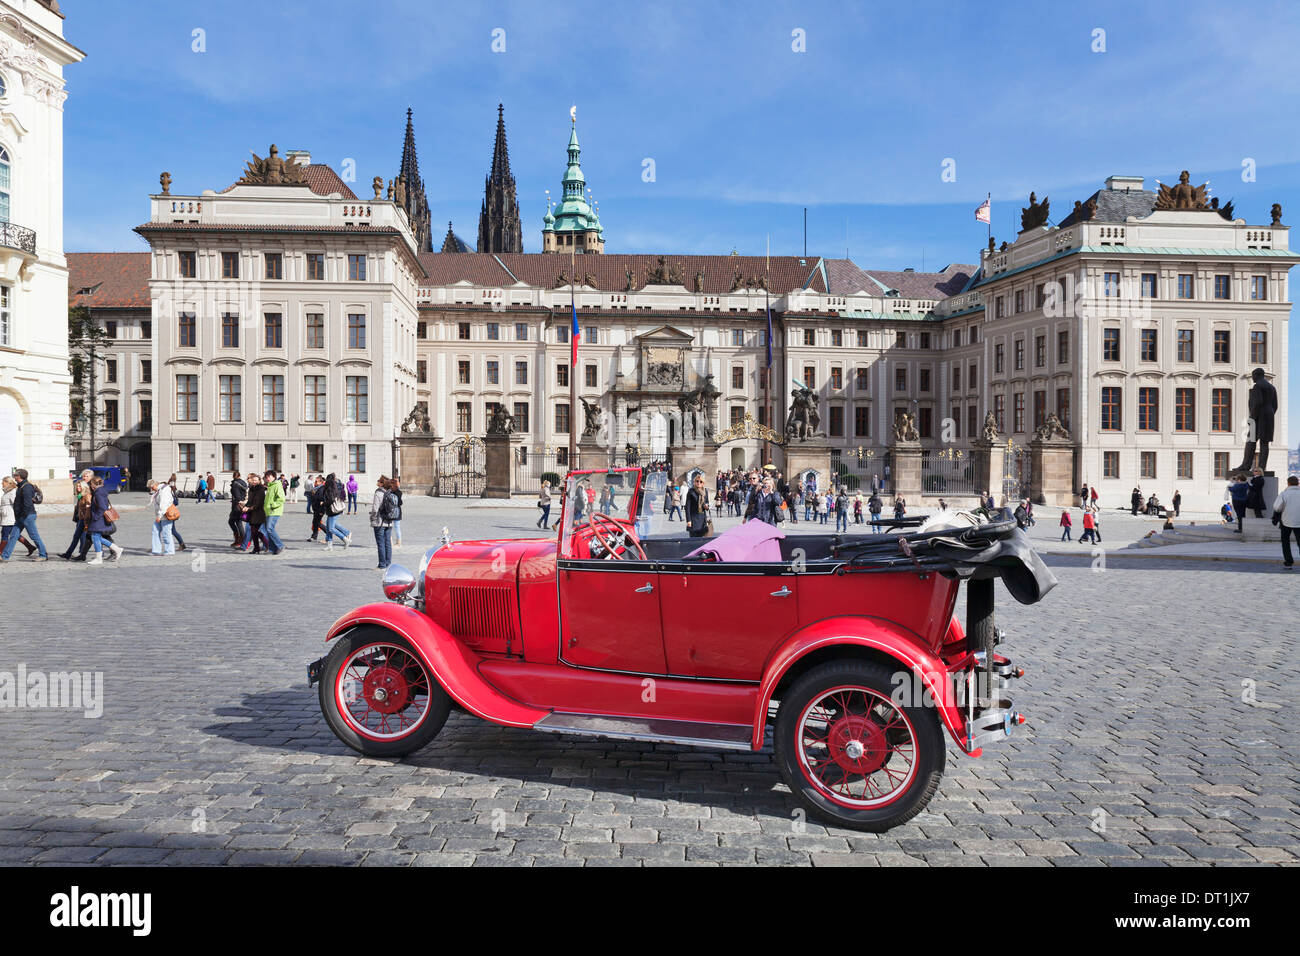 Red Oldtimer sightseeing, Hradcany Square, Castle Hradcany and St Vitus cathedral, UNESCO Site, Prague, Czech Republic Stock Photo